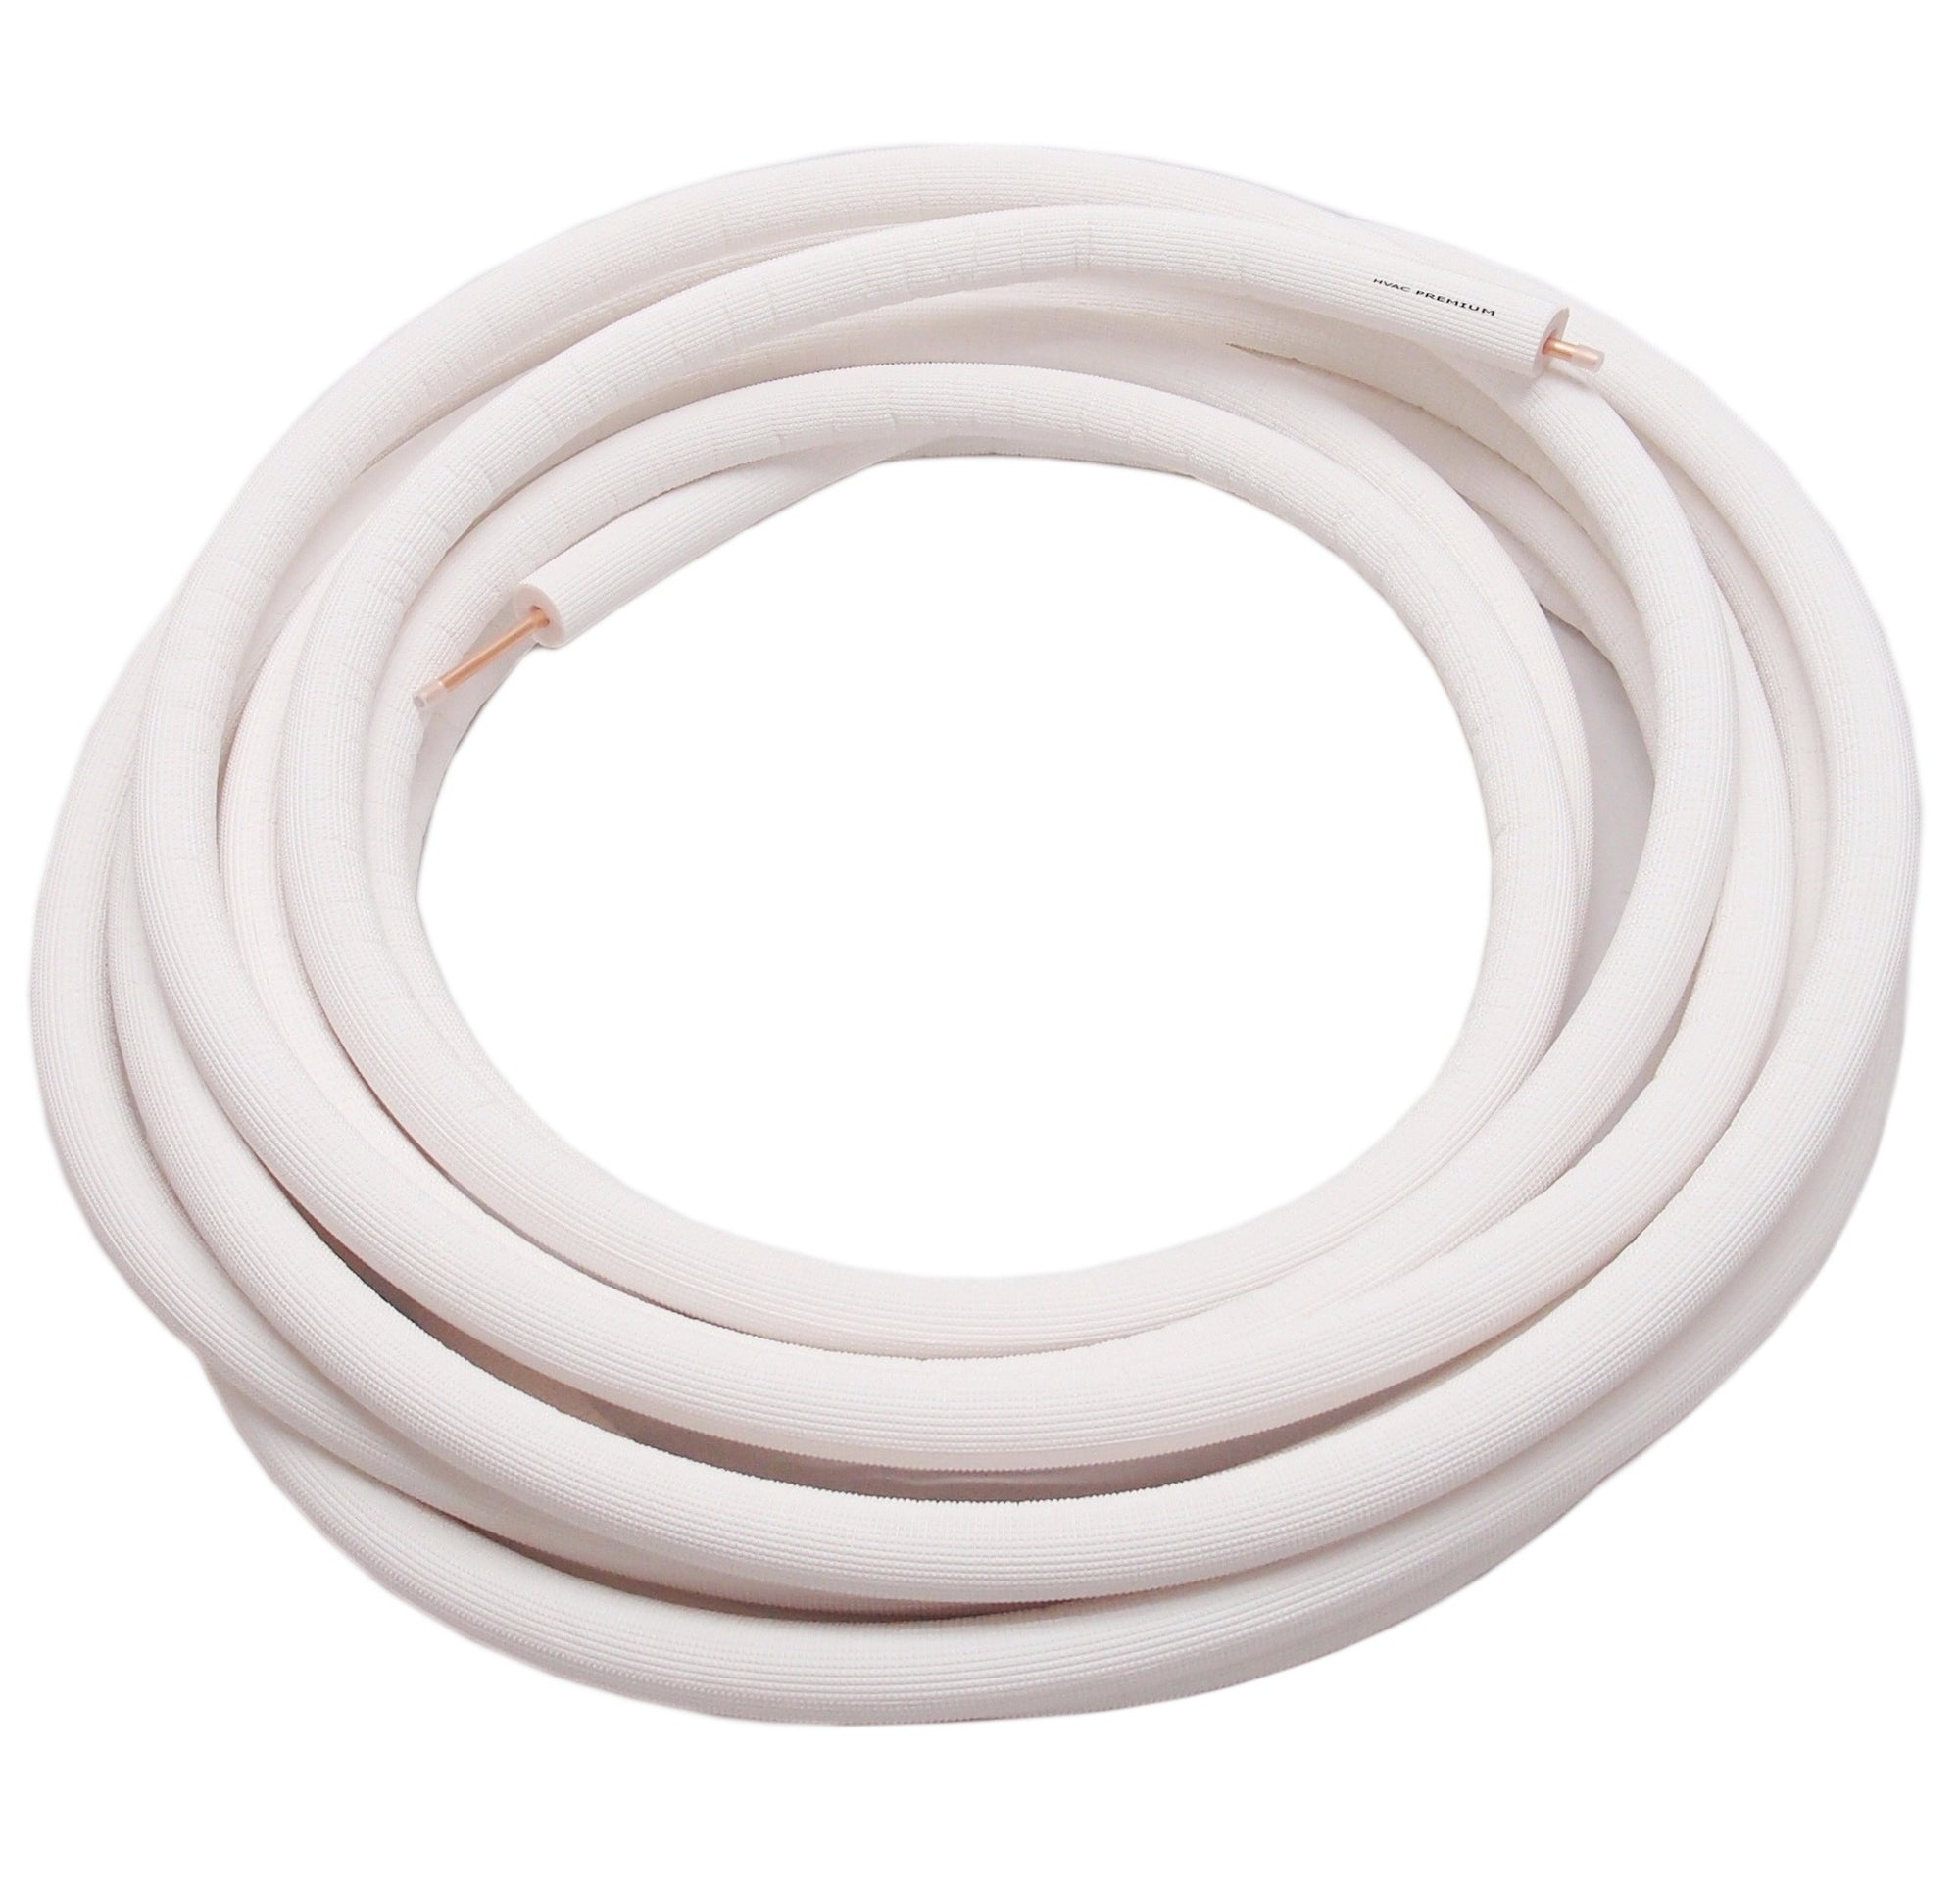 1/4" Insulated Copper Coil Line - Seamless Pipe Tube for HVAC, Refrigerant - 1/2" White Insulation - 164' Long